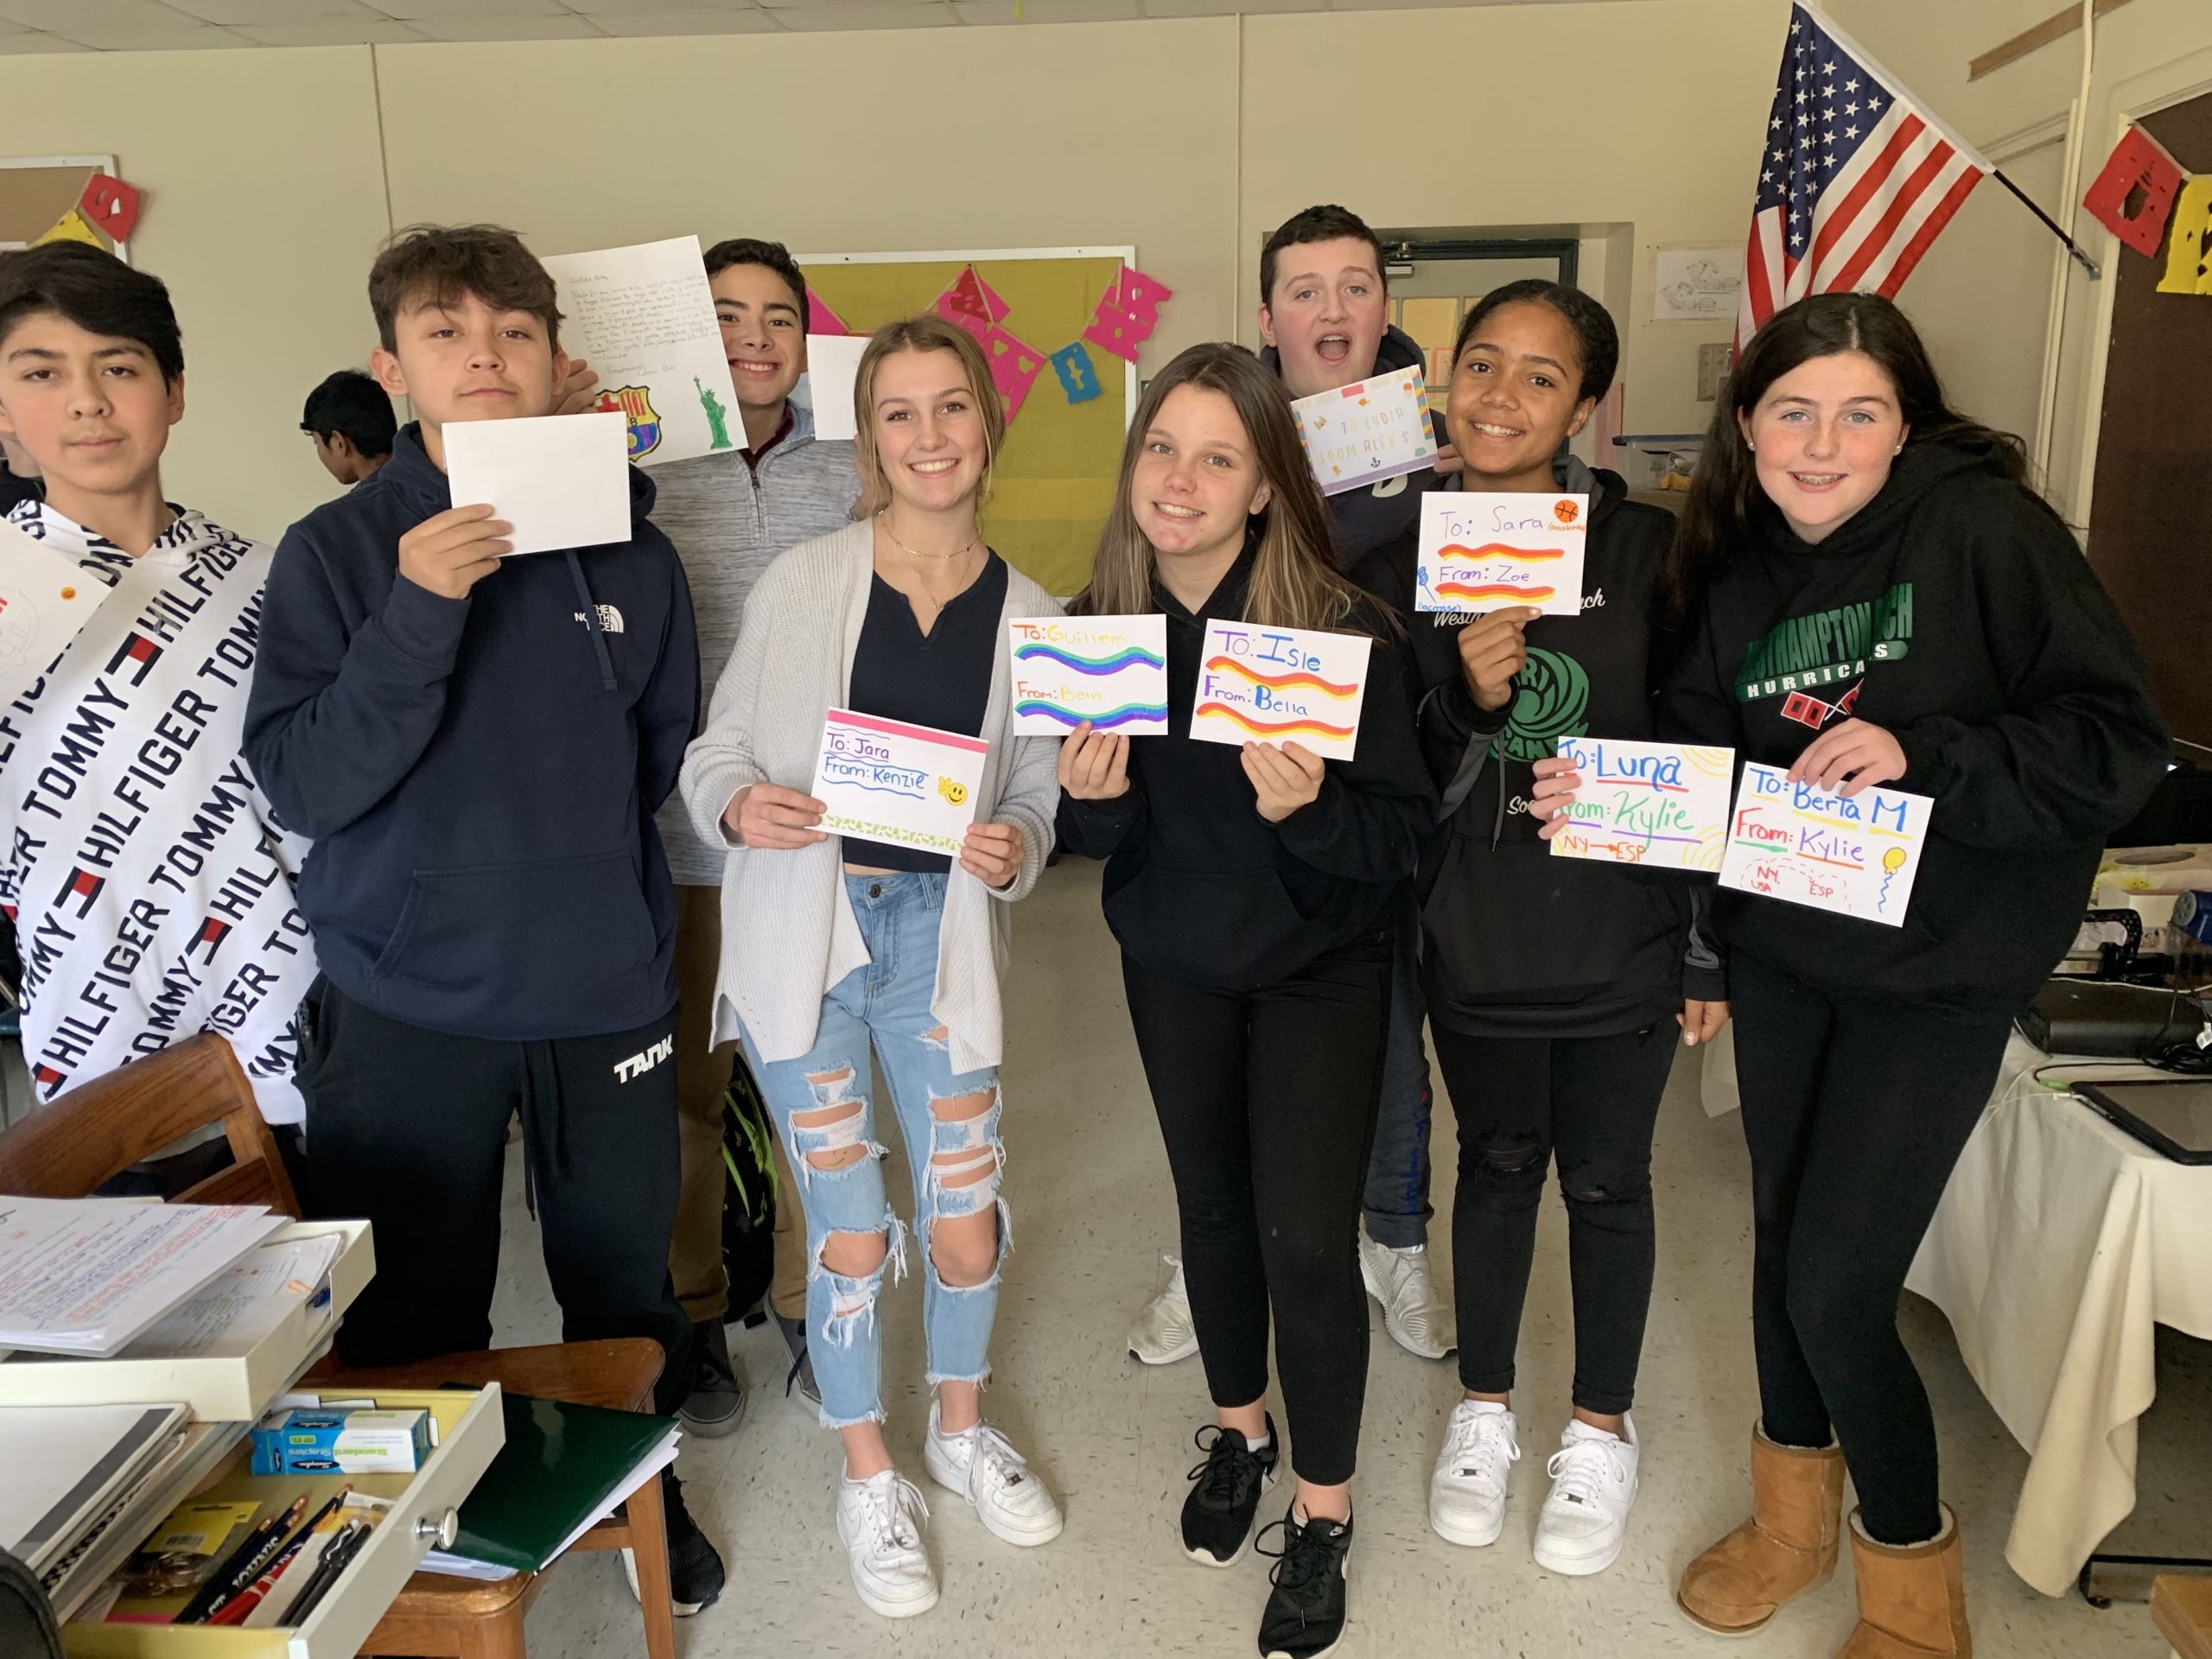 To provide her Spanish language students with an opportunity to make international connections and put the language they are learning to use, Spanish teacher Marica Illiano started a pen pal project. For the project, all 60 of her Spanish 2 students at Westhampton Beach Middle School have been writing letters to students studying English in Barcelona.